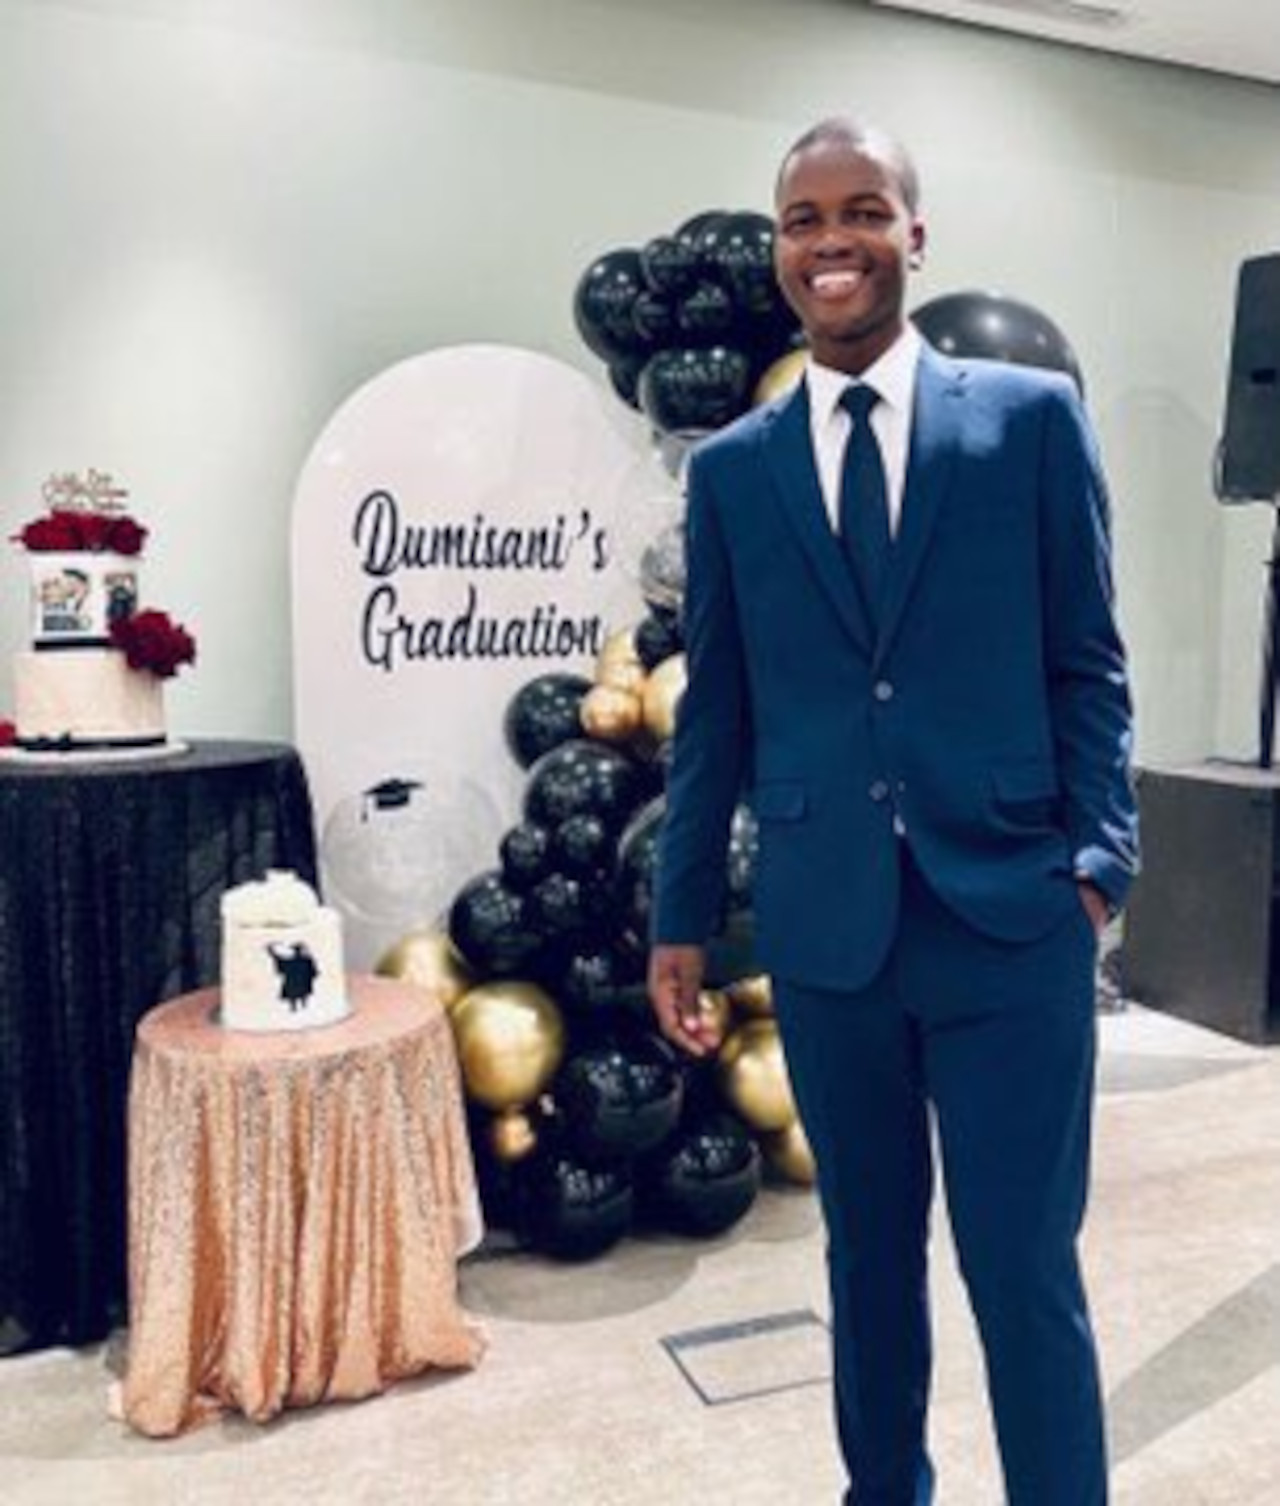 PICS: When Grace Locates You - Crying UKZN Student Who Could Not Afford Graduation Suit Celebrates 